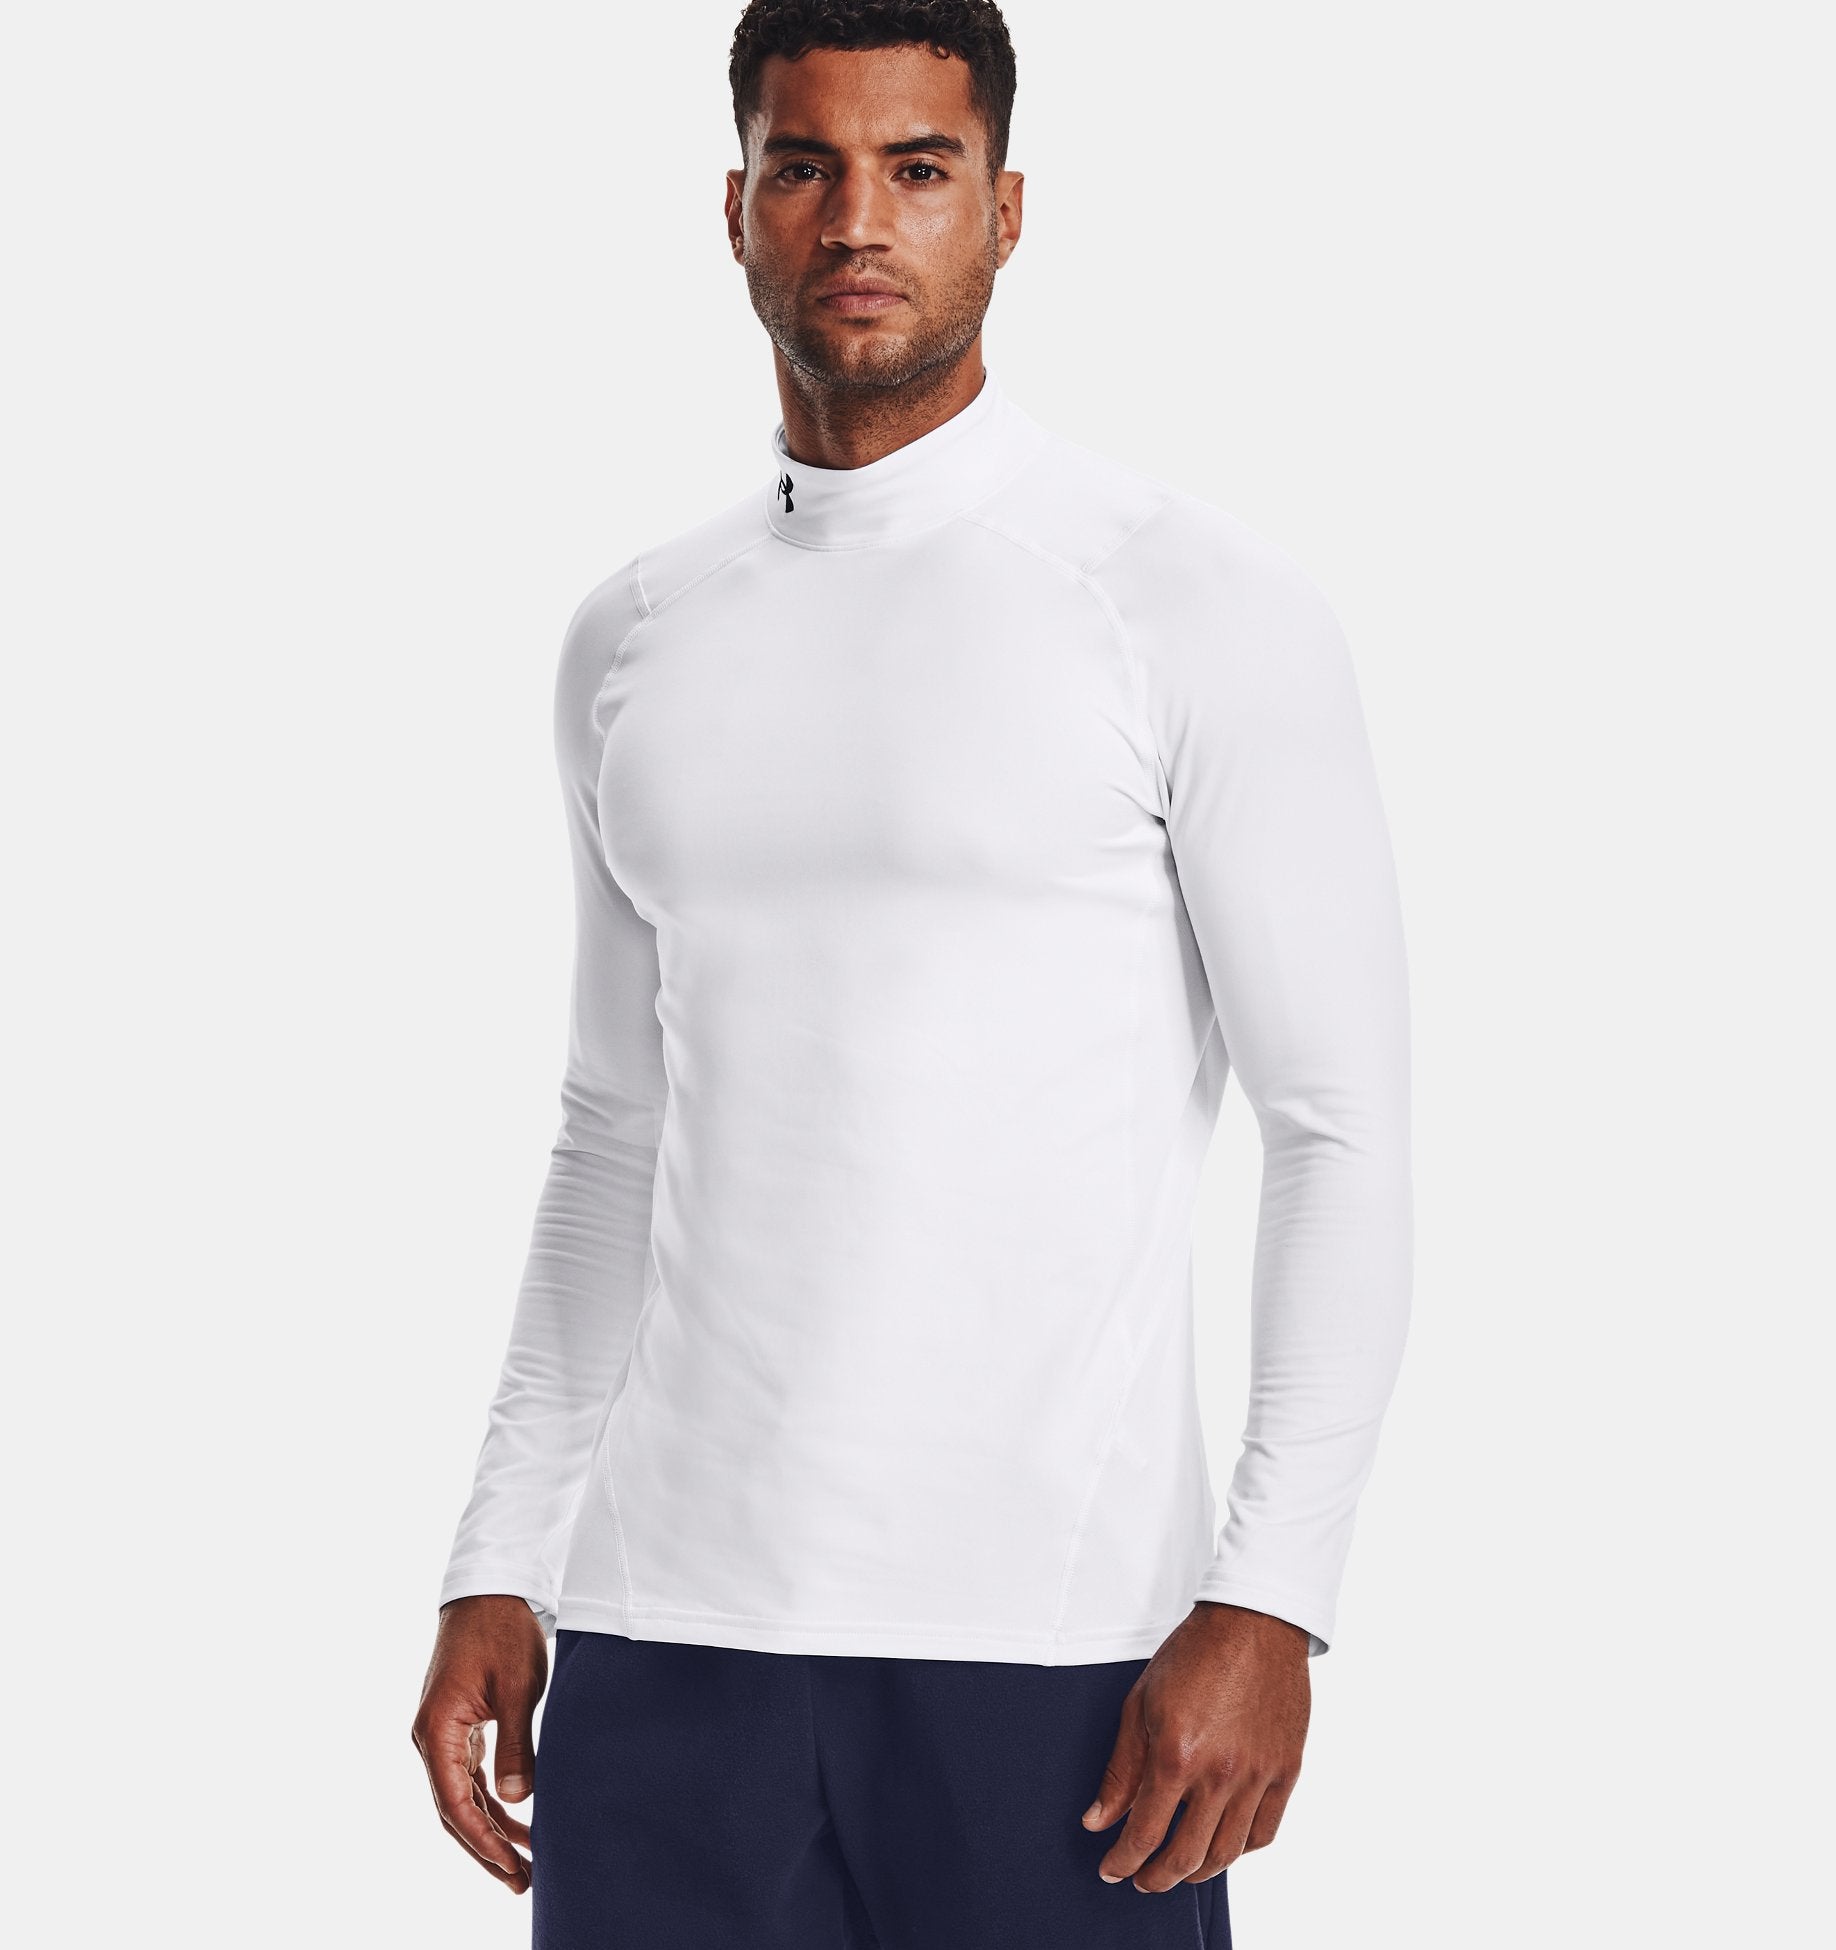 Under Armour Black Long Sleeve Compression Shirt w/ Contrast